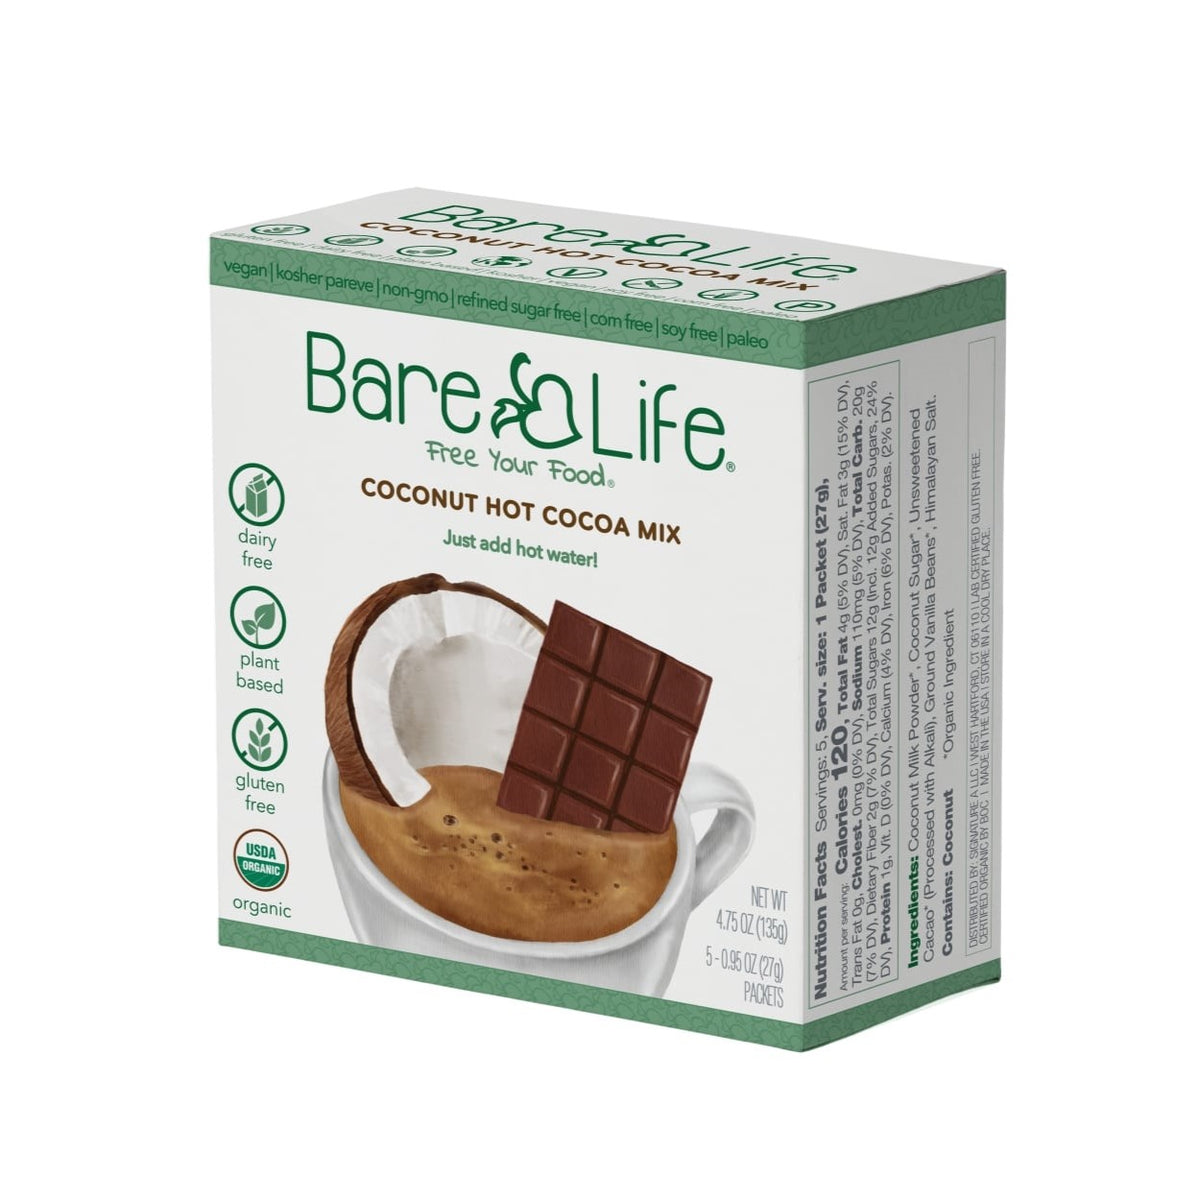 Bare Life Dairy Free Vegan Gluten Free Coconut Hot Cocoa 5 Pack Single Serving Front